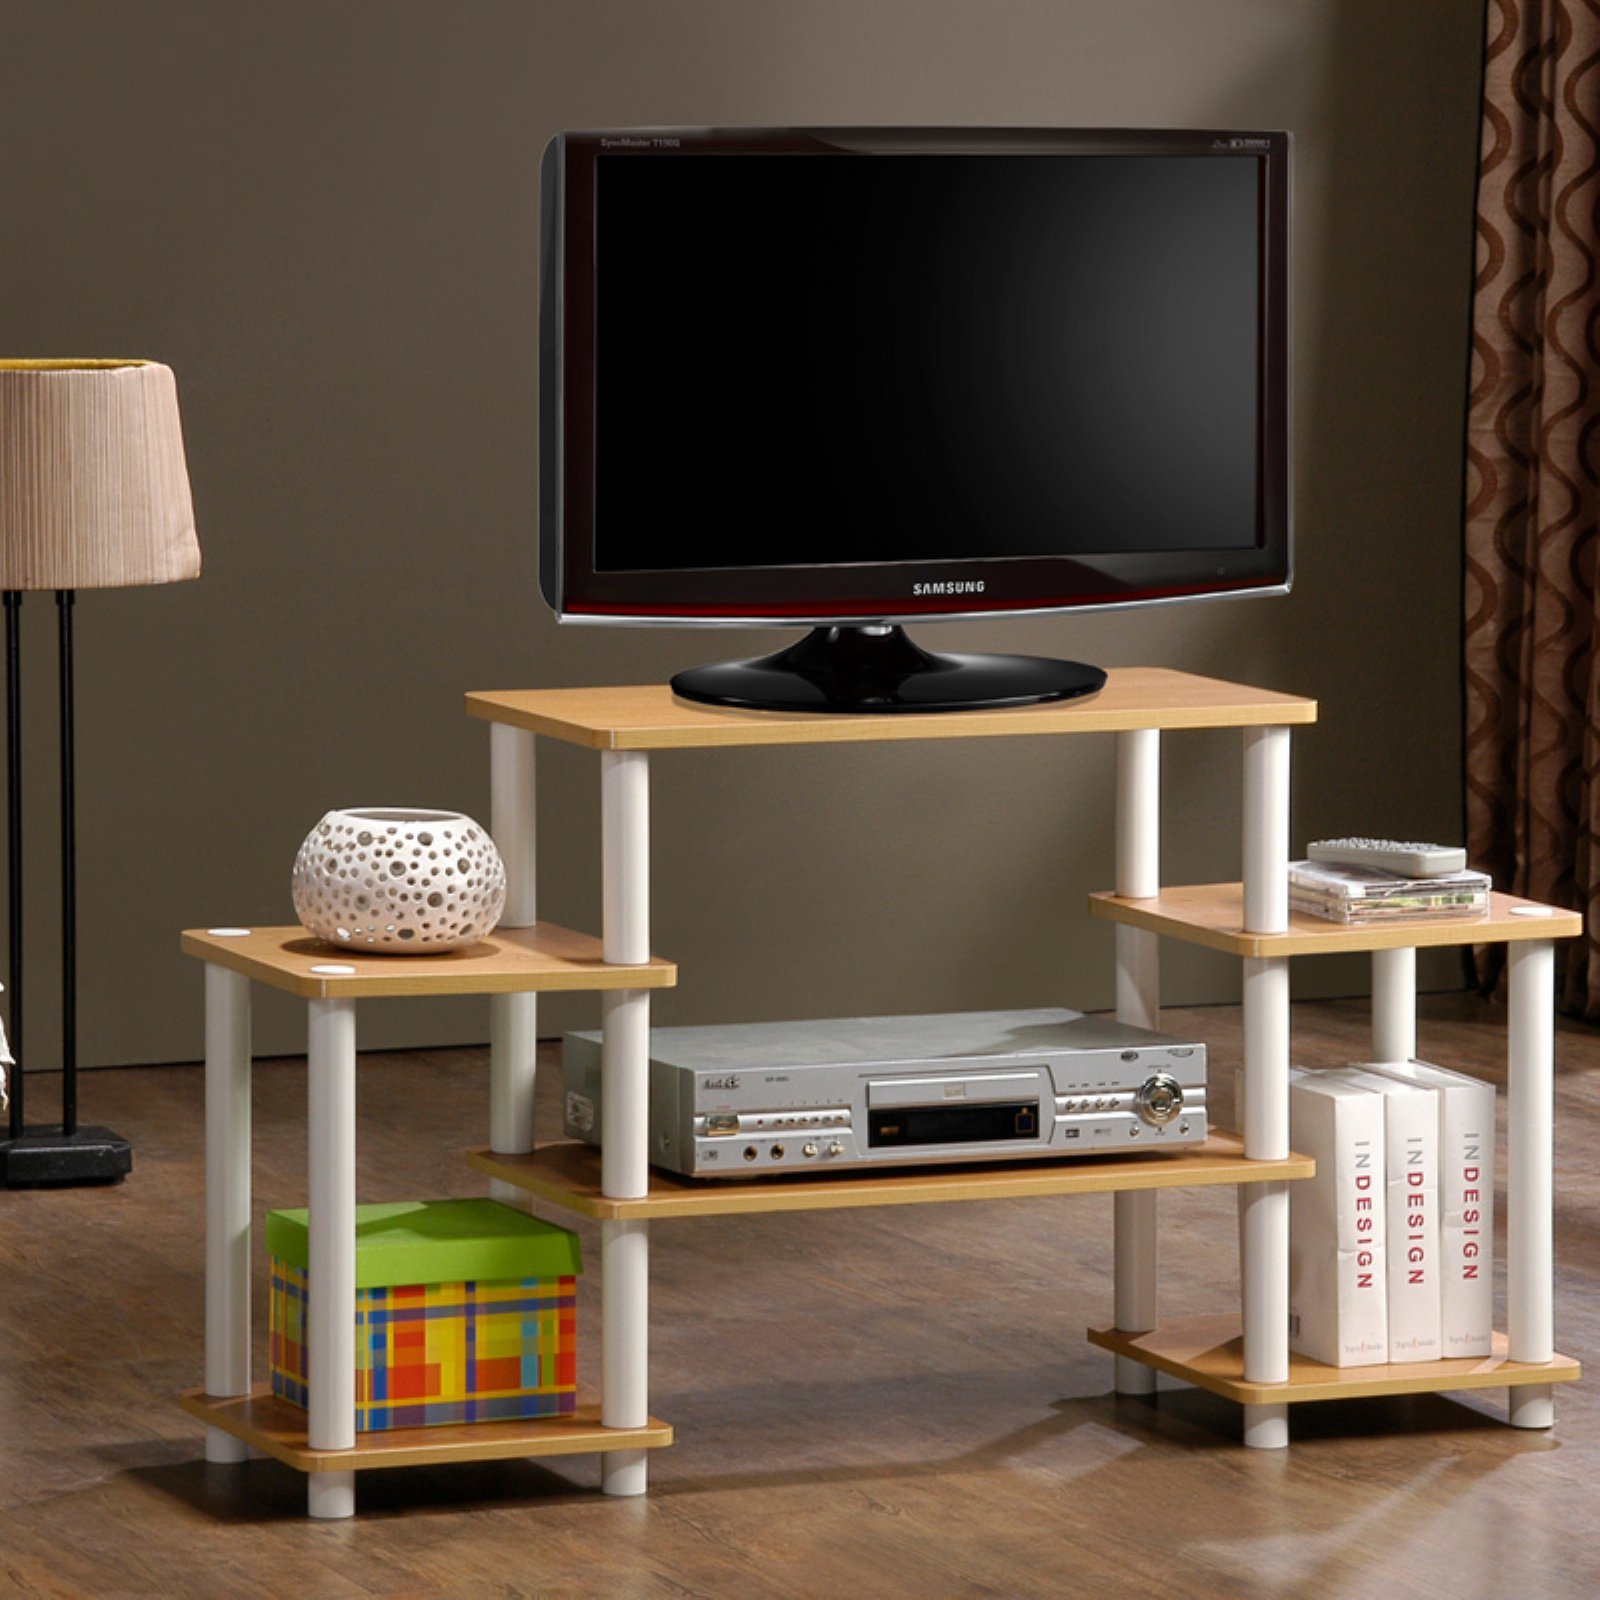 Furinno 11257 Turn-N-Tube TV Stand for up to 25 TV - image 2 of 5